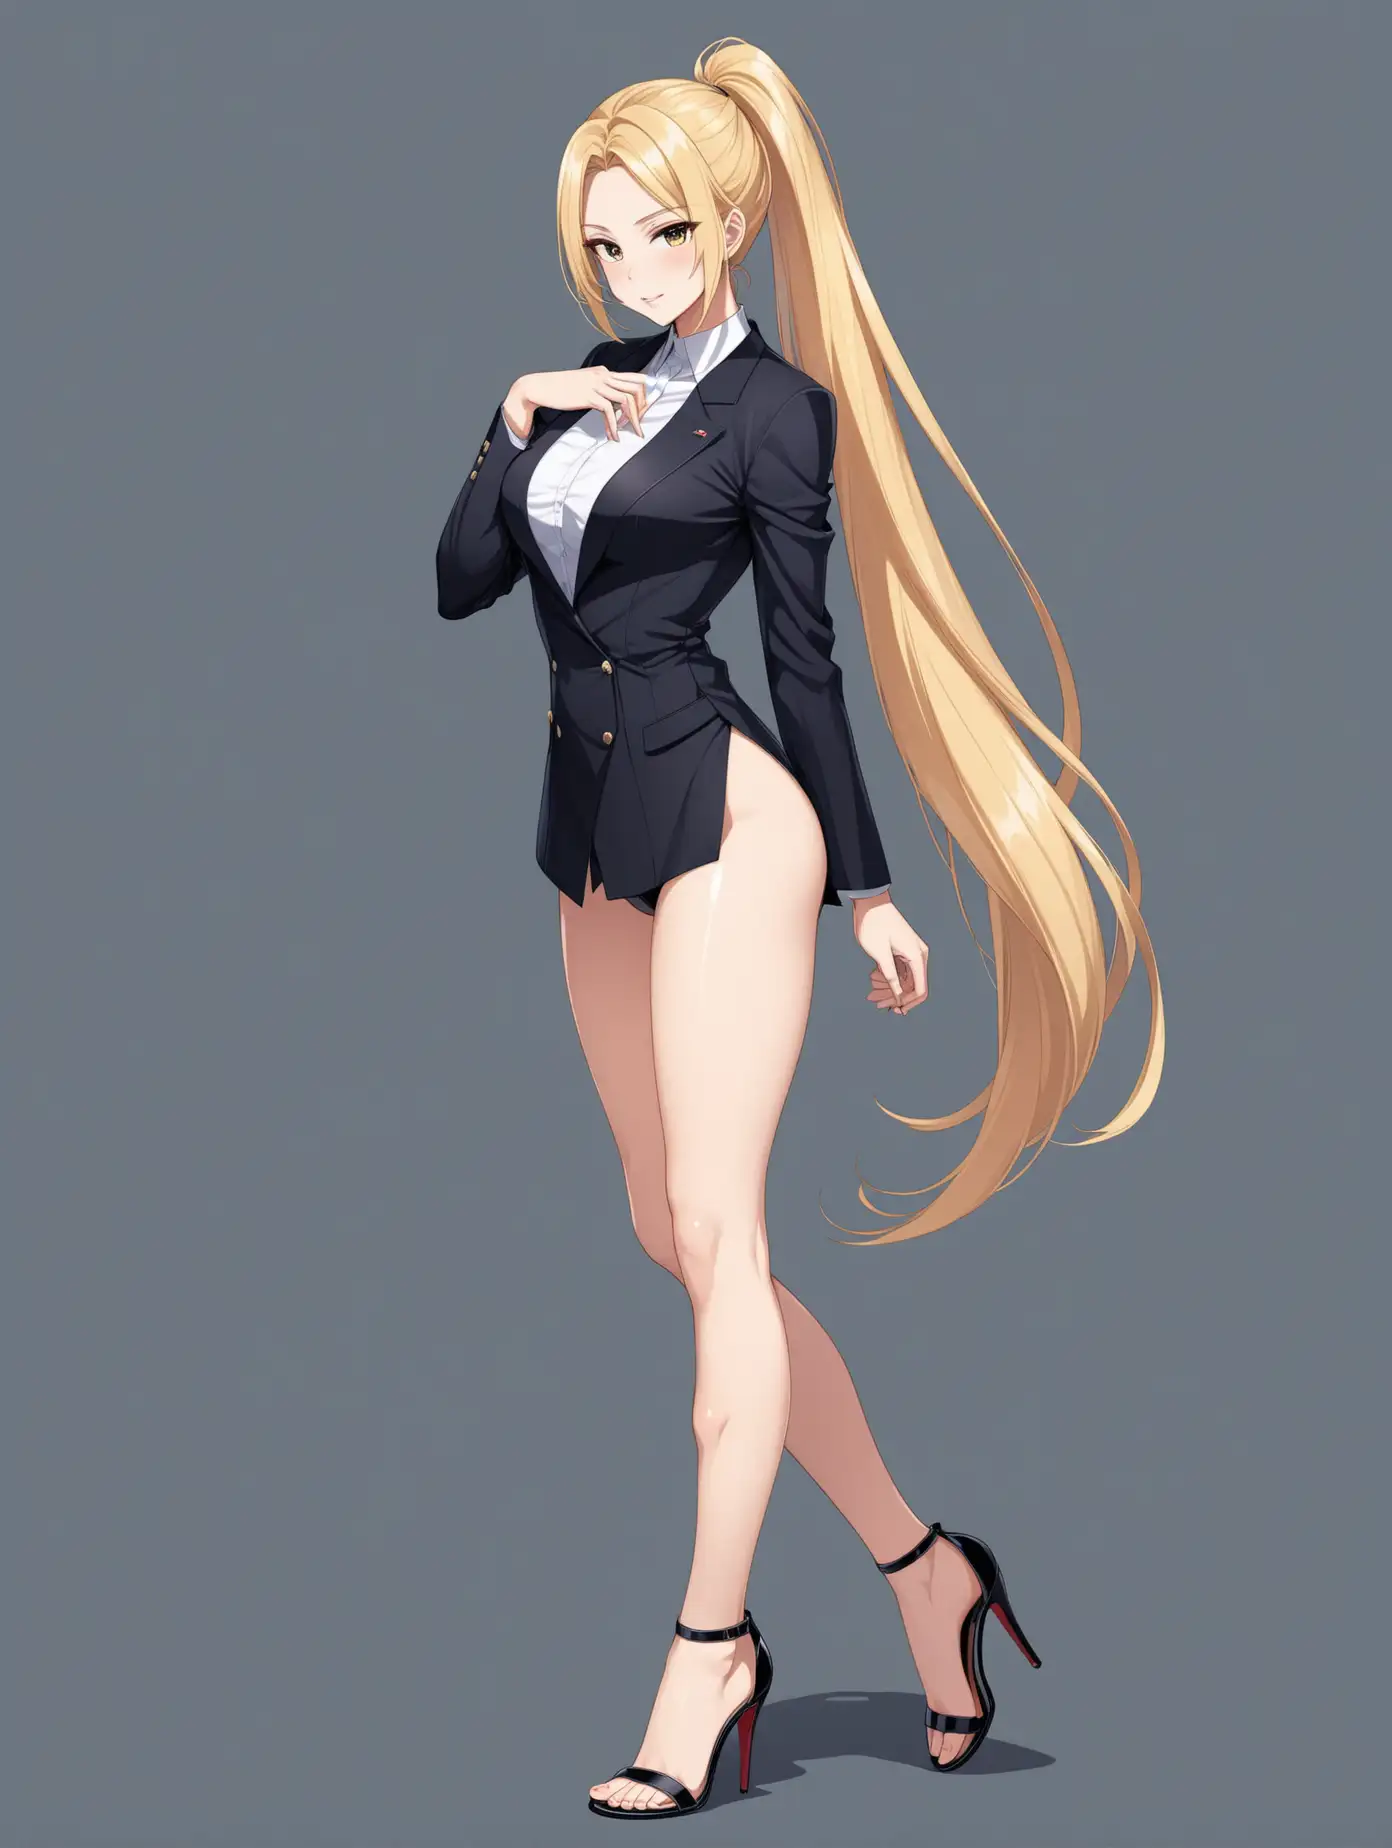 Sensual picture in full body of a anime girl, hot, elegant, political leader, height tall, blonde hair, long ponytail, ankle strip high heels sandals, 2 poses